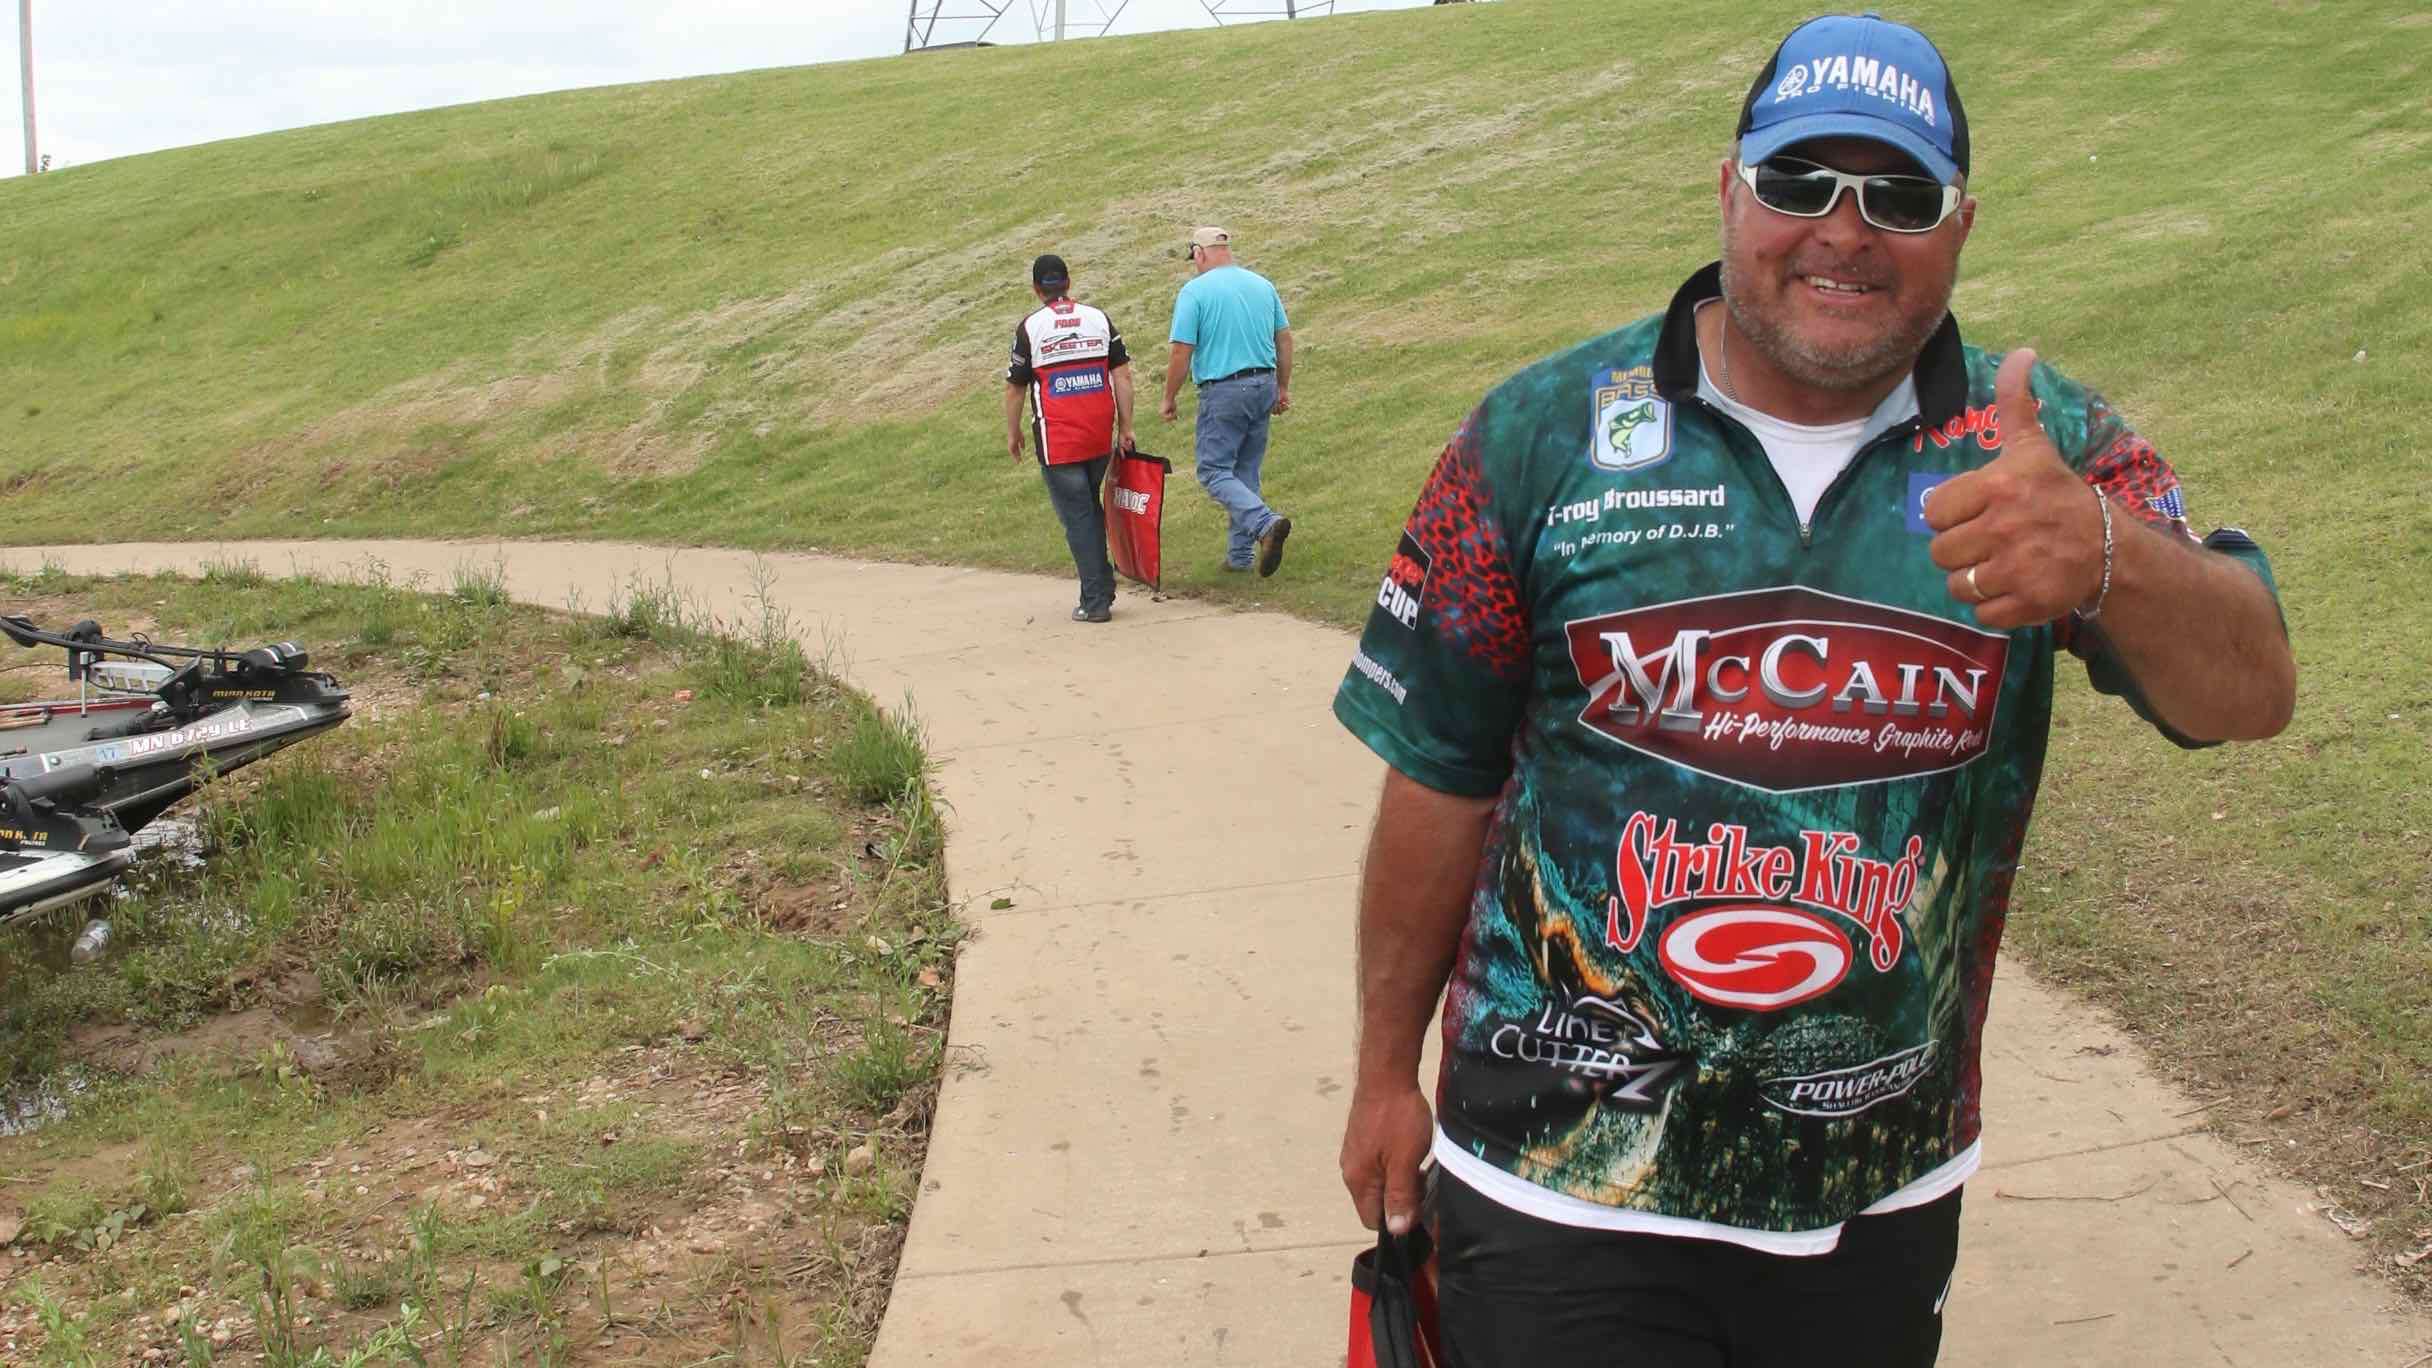 T-roy Broussard gave a thumbs up as he walked to the weigh-in line. He caught a limit weighing 10-11, which has him in 52nd place. Only 62 of 194 pros caught a five-bass limit on Day 1.